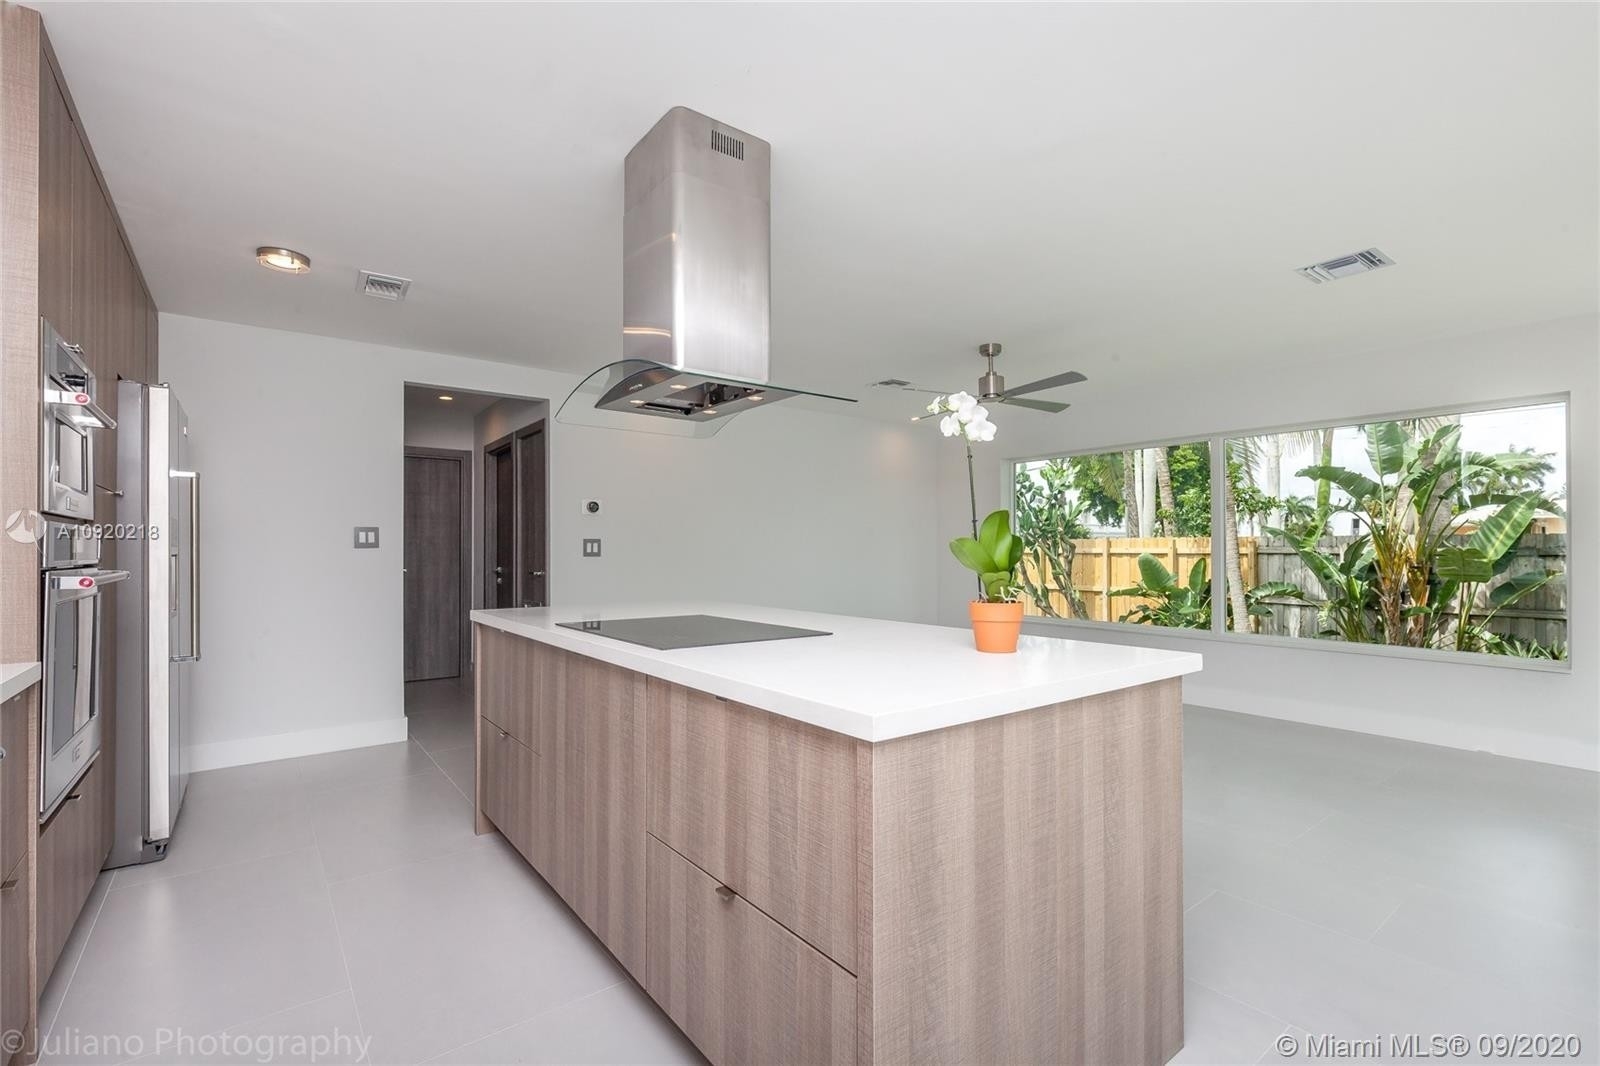 33. Rentals at 2706 NE 32nd Ave, 1 Fort Lauderdale